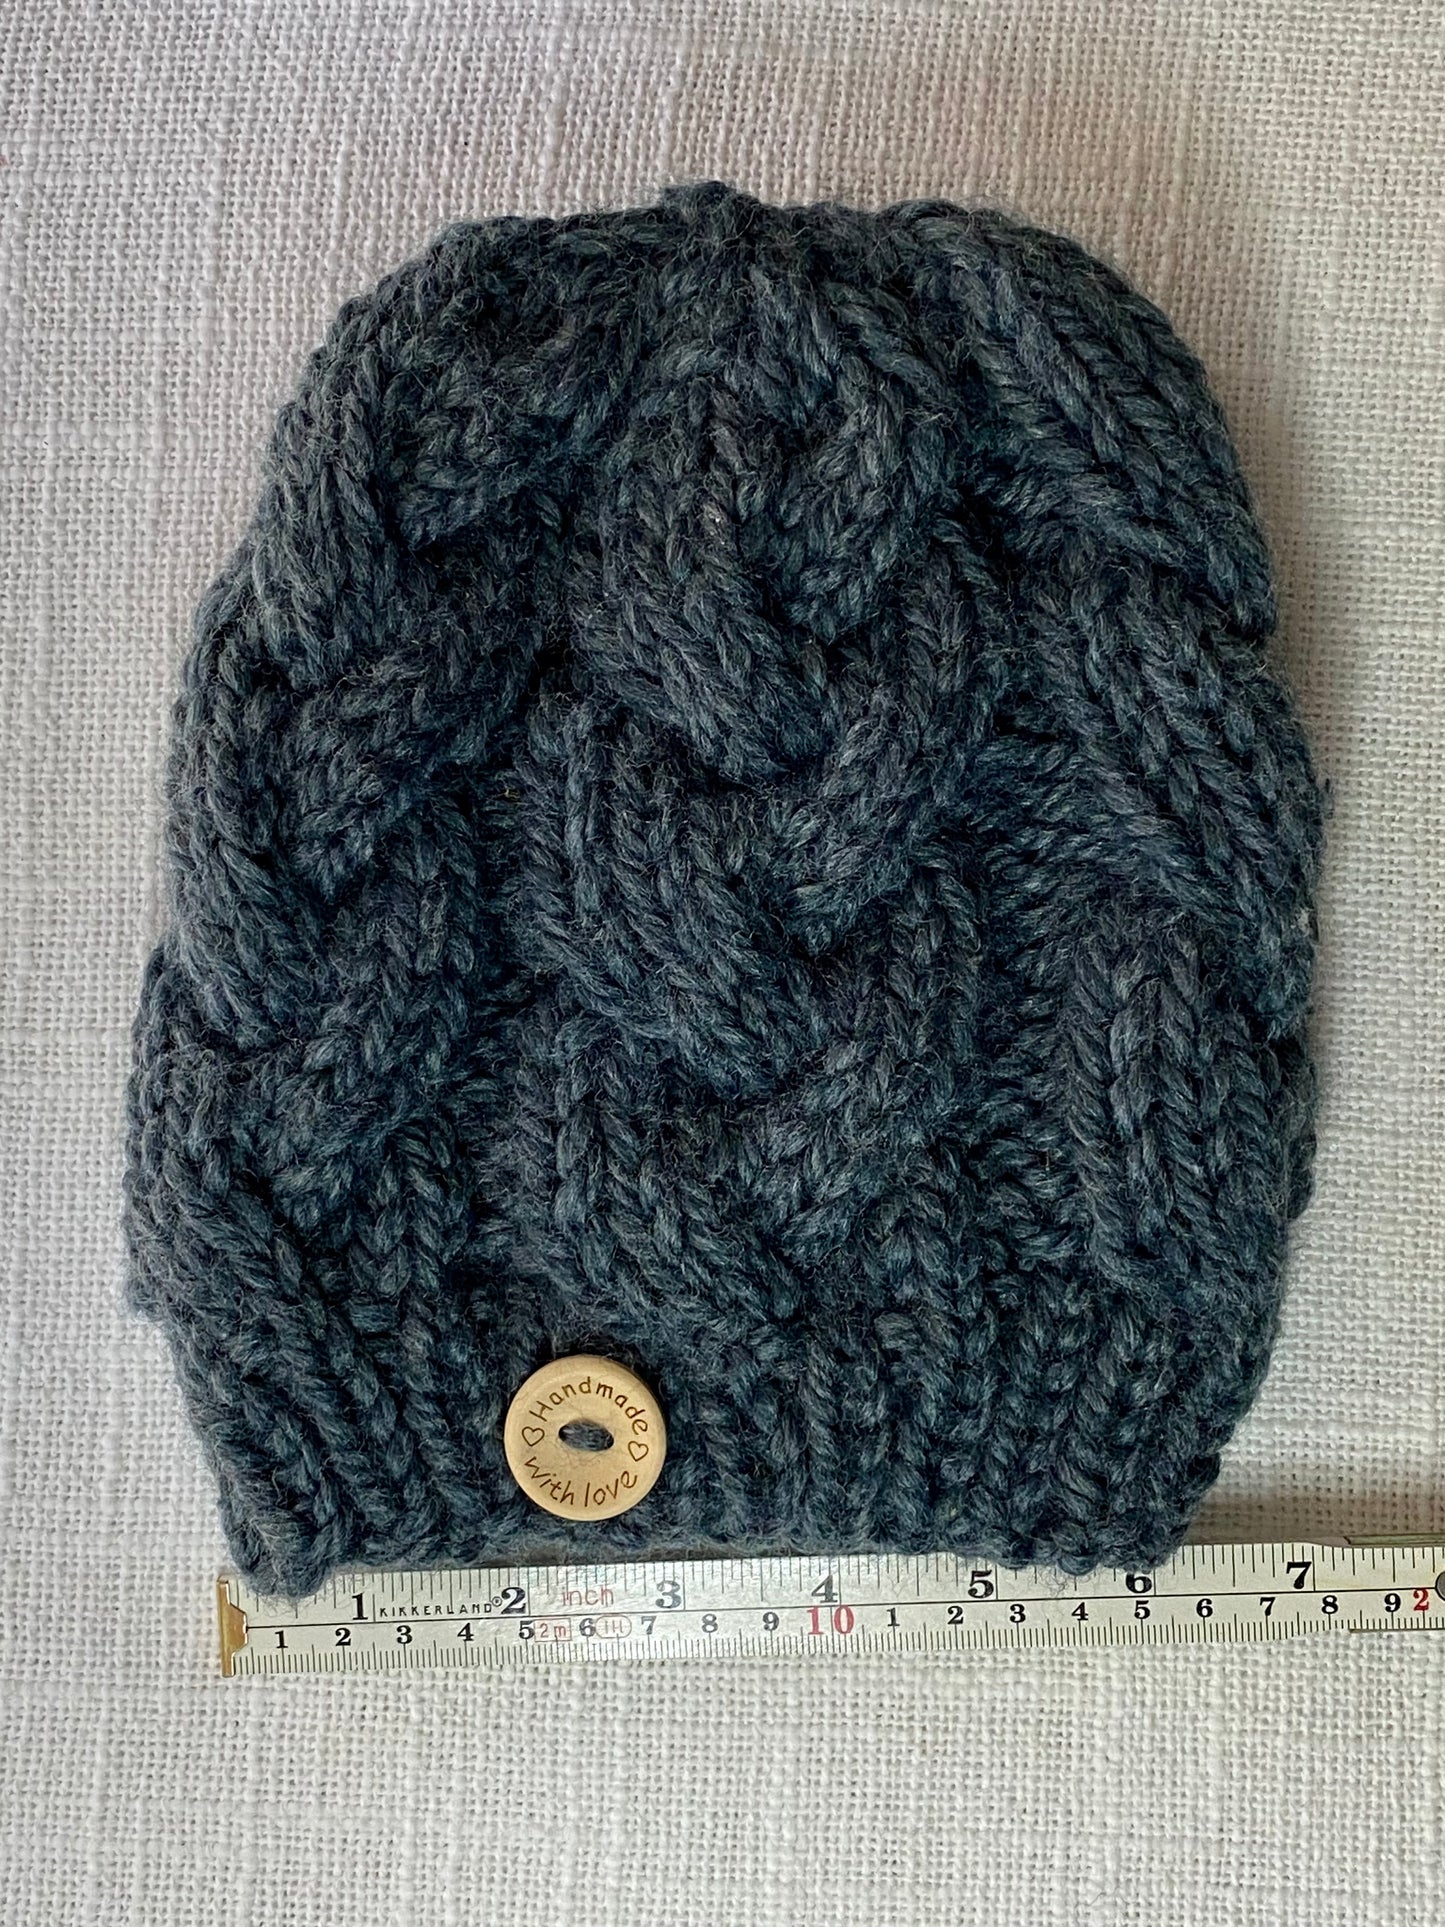 Cozy Cables Hat in Denim Blue - Recycled Synthetic Fiber